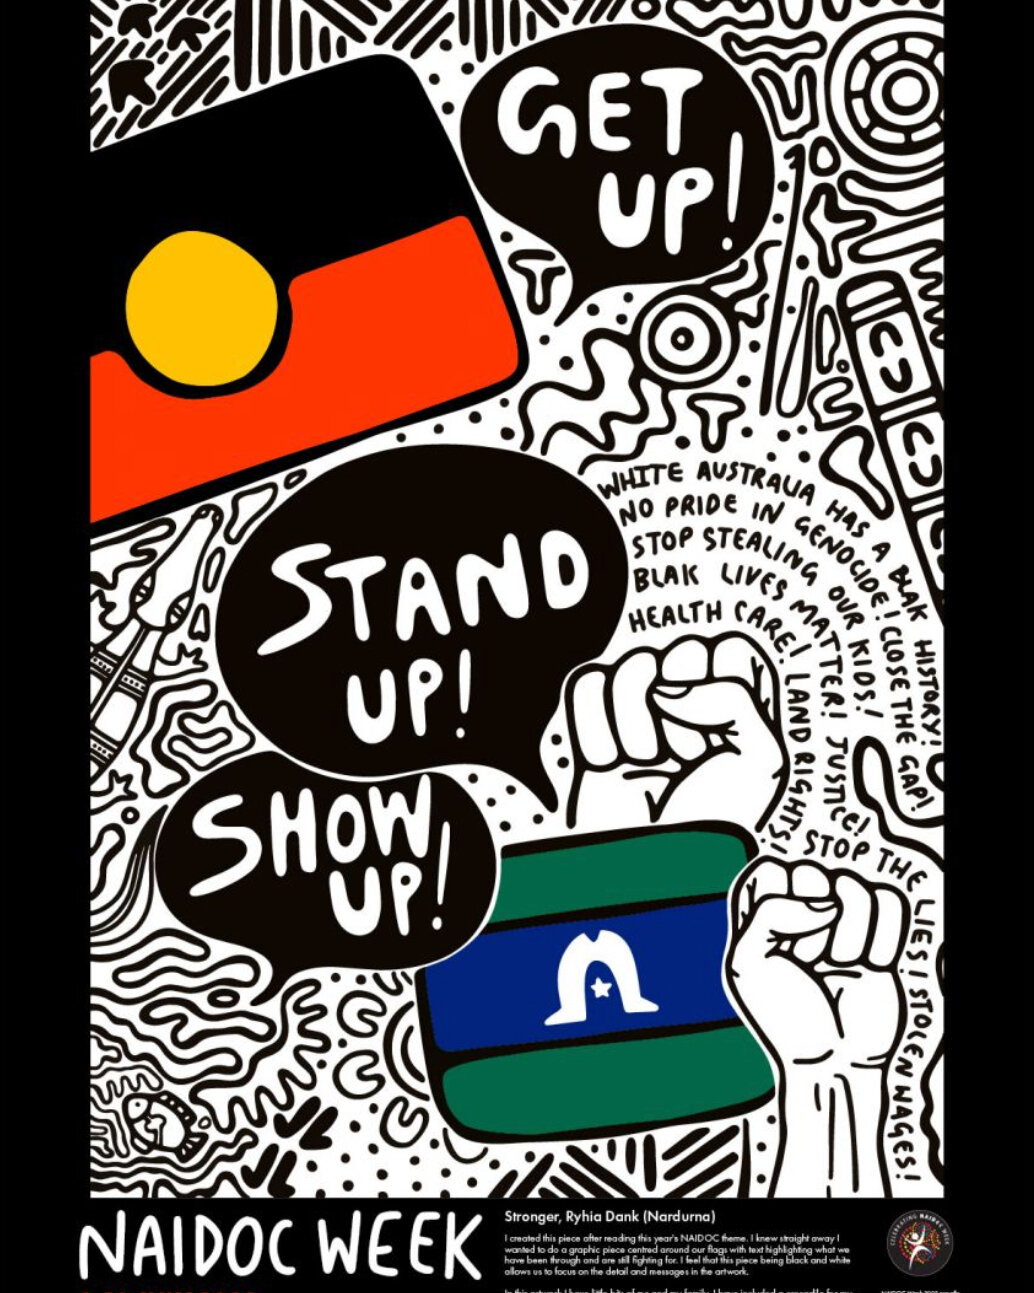 This week has been NAIDOC week and the theme this year is Get up, Stand up, Show up. ​​​​​​​​
This is a week to celebrate elders past who have led and driven change and to stand together as we look forward to how we can support first nations people t